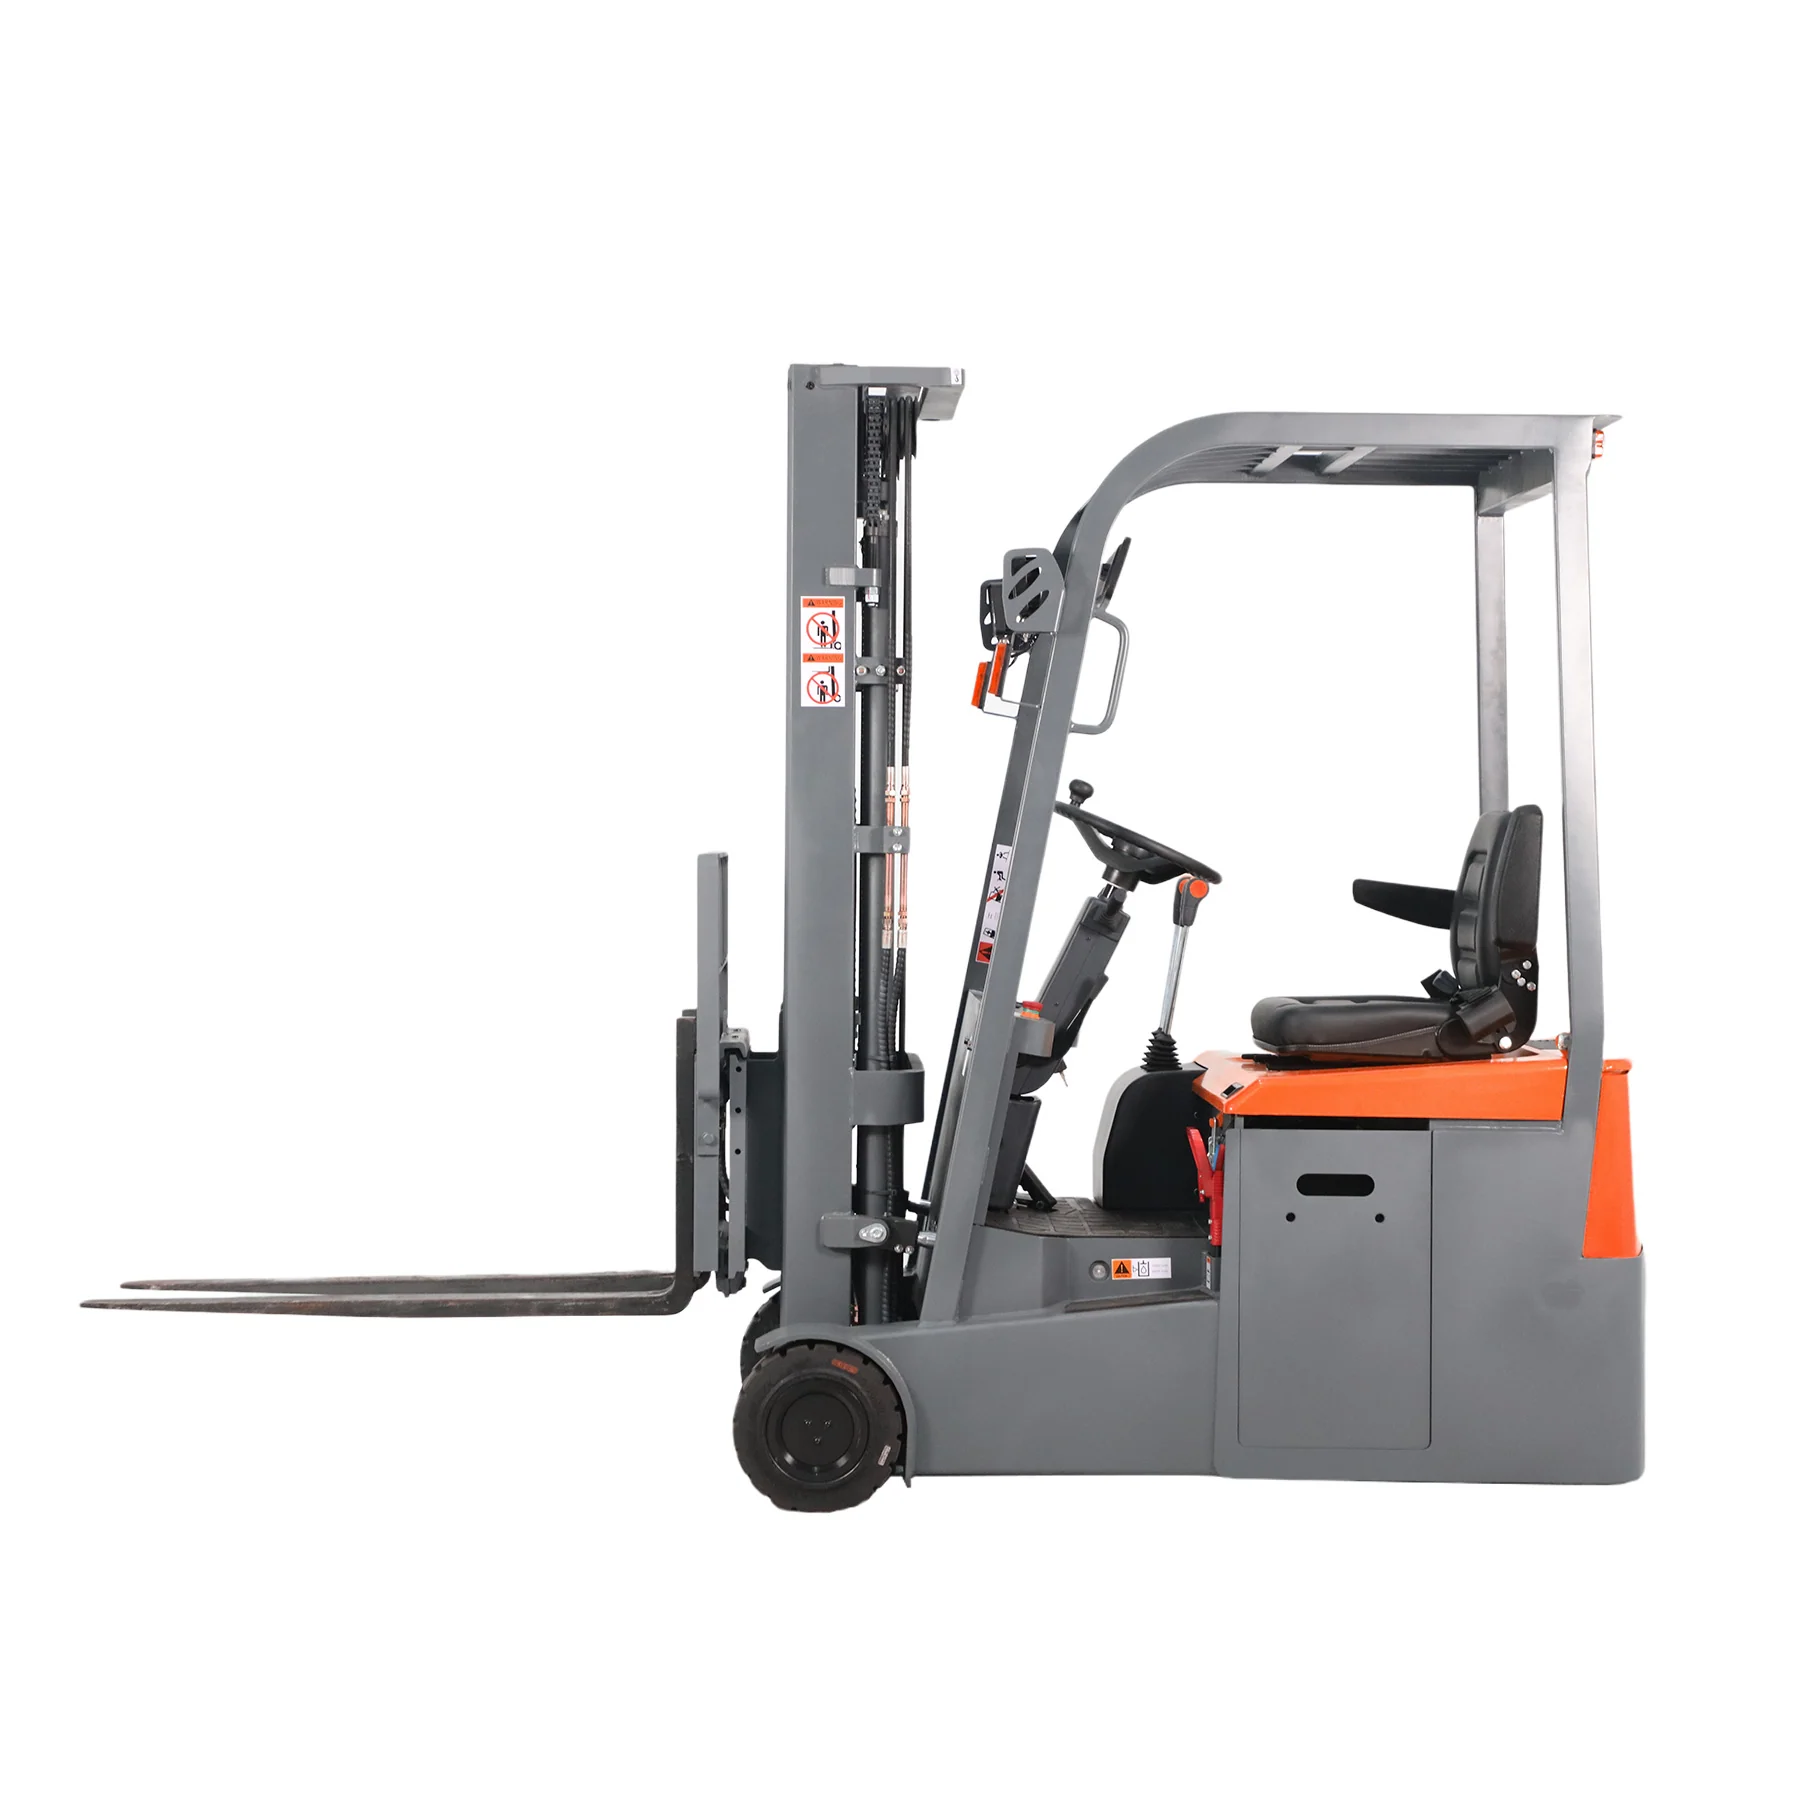 Apollolift, Apollolift A-3041 Electric Forklift Battery Powered 3 Wheel 197" Lifting 3300 lbs. Capacity CPD15S-E New